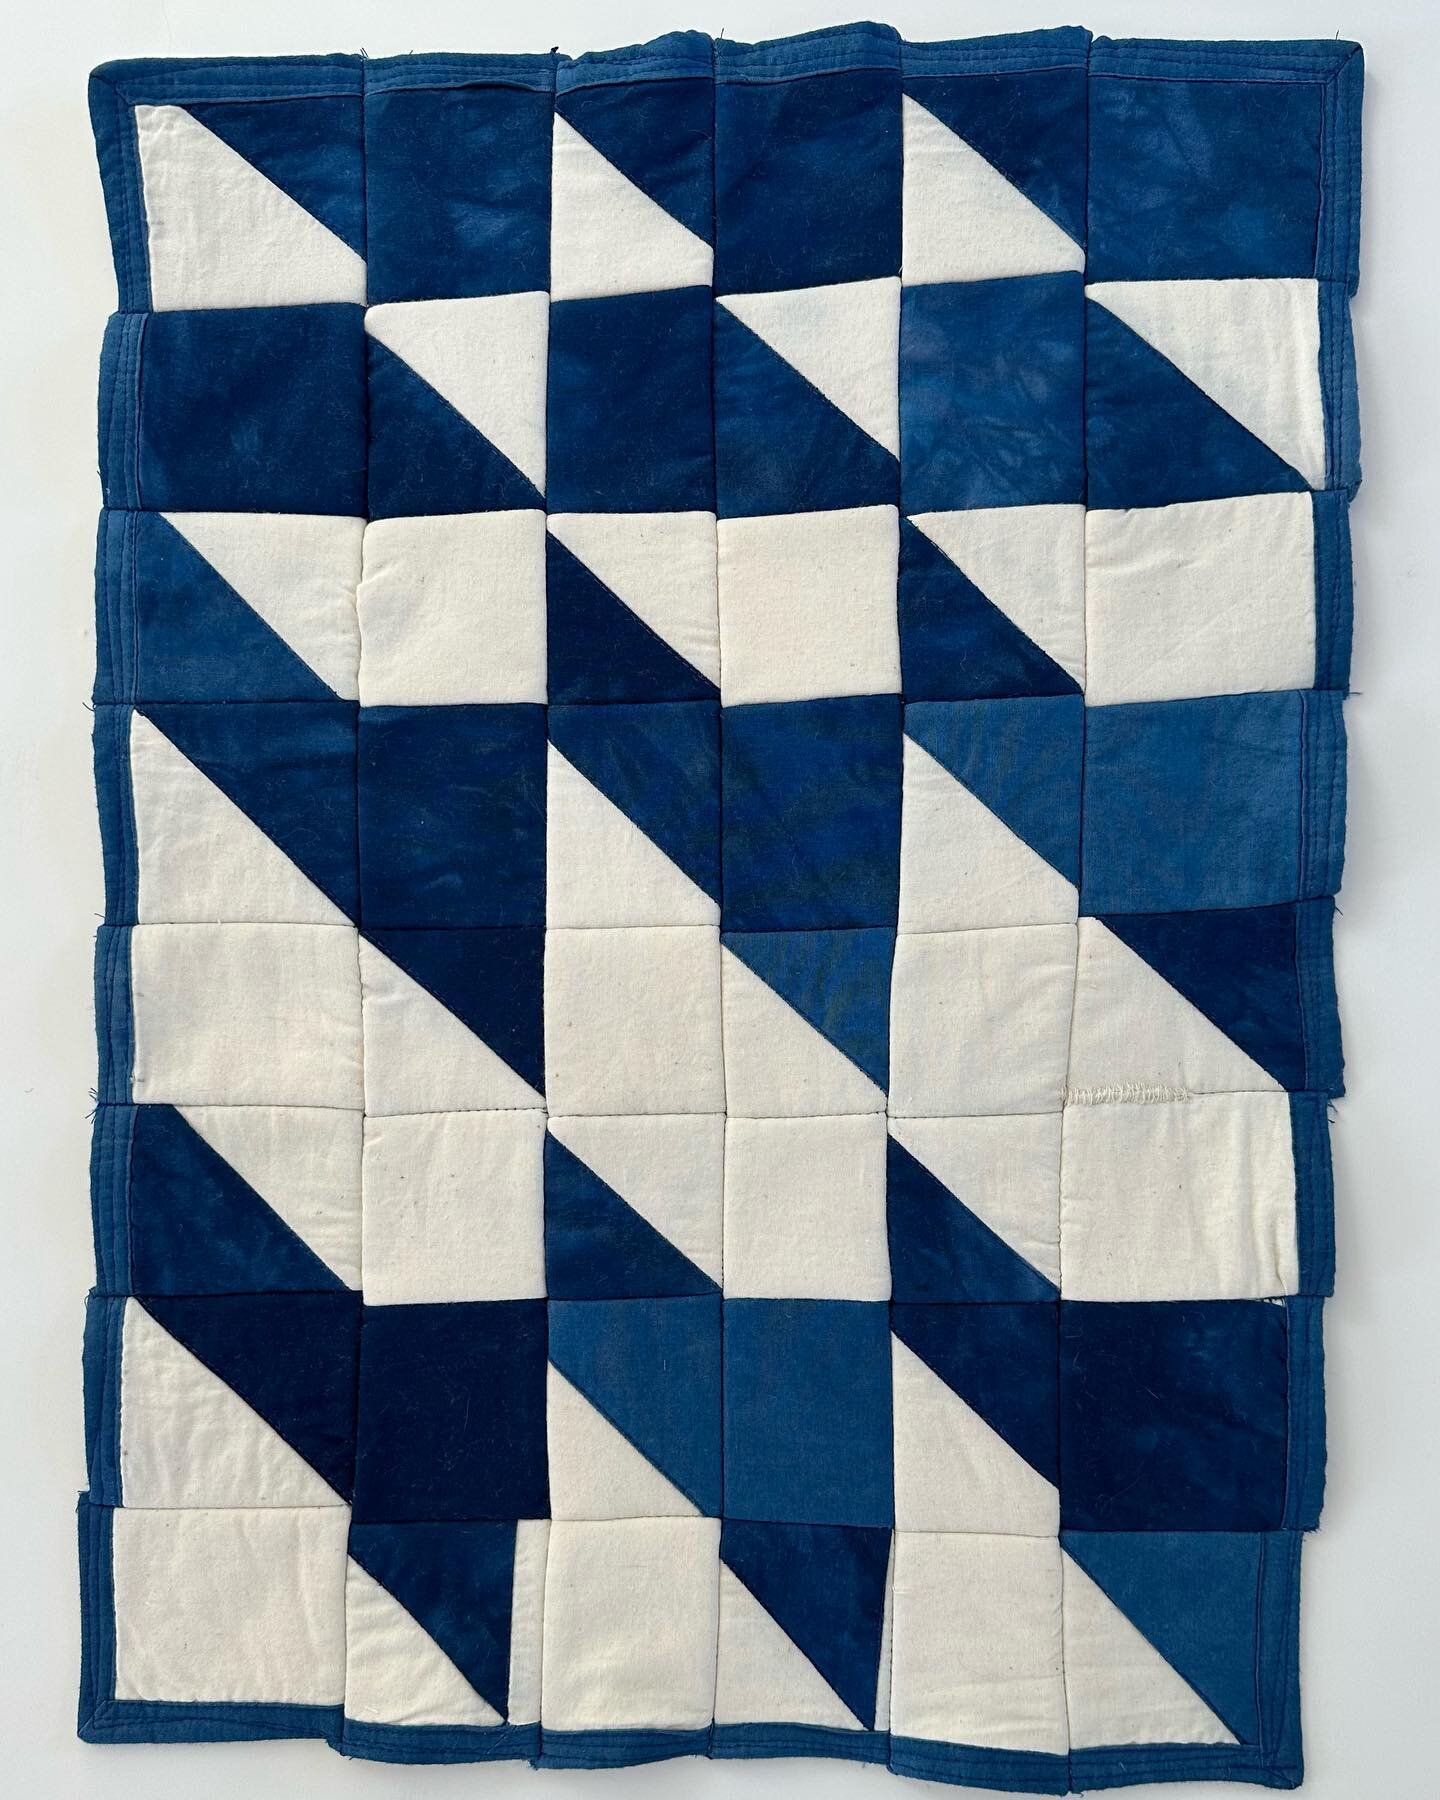 A study on breaking and mending. Hand-dyed quilted cotton, 20 x 15&rdquo;.
 
Russell Brand has been accused of rape and sexual assault by four women. I am not the least bit surprised, but I am absolutely disgusted by the people who defend him. 

Whil